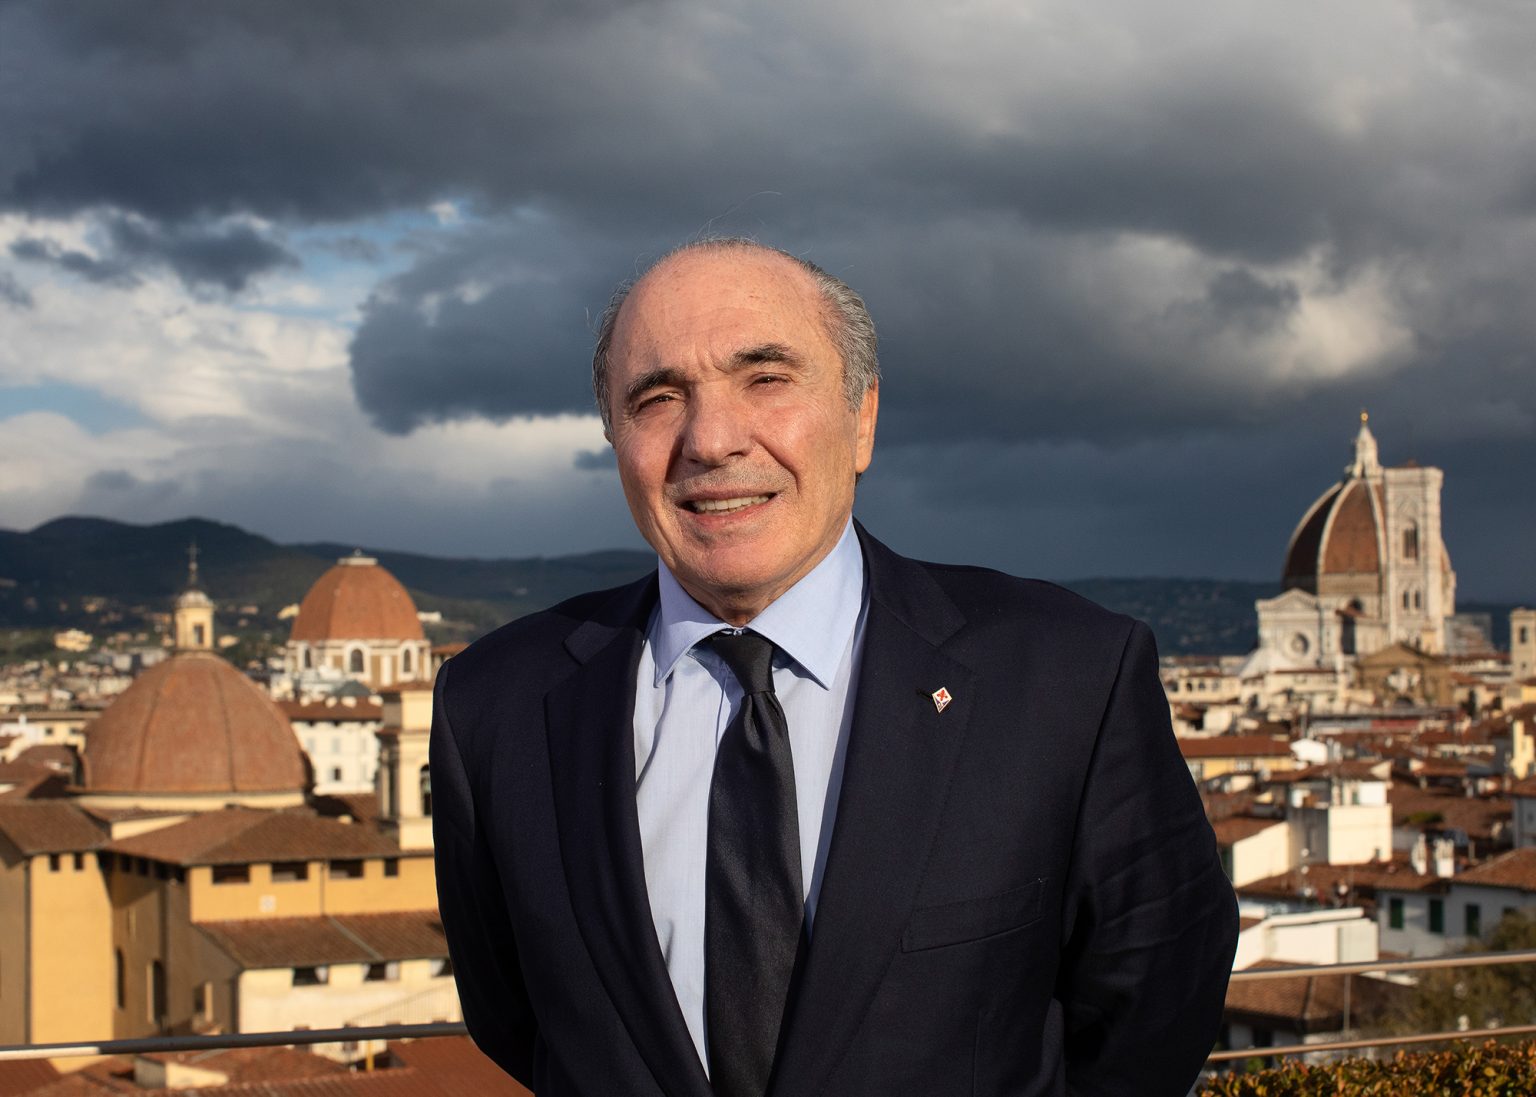 Rocco Commisso at the Excelsior Hotel